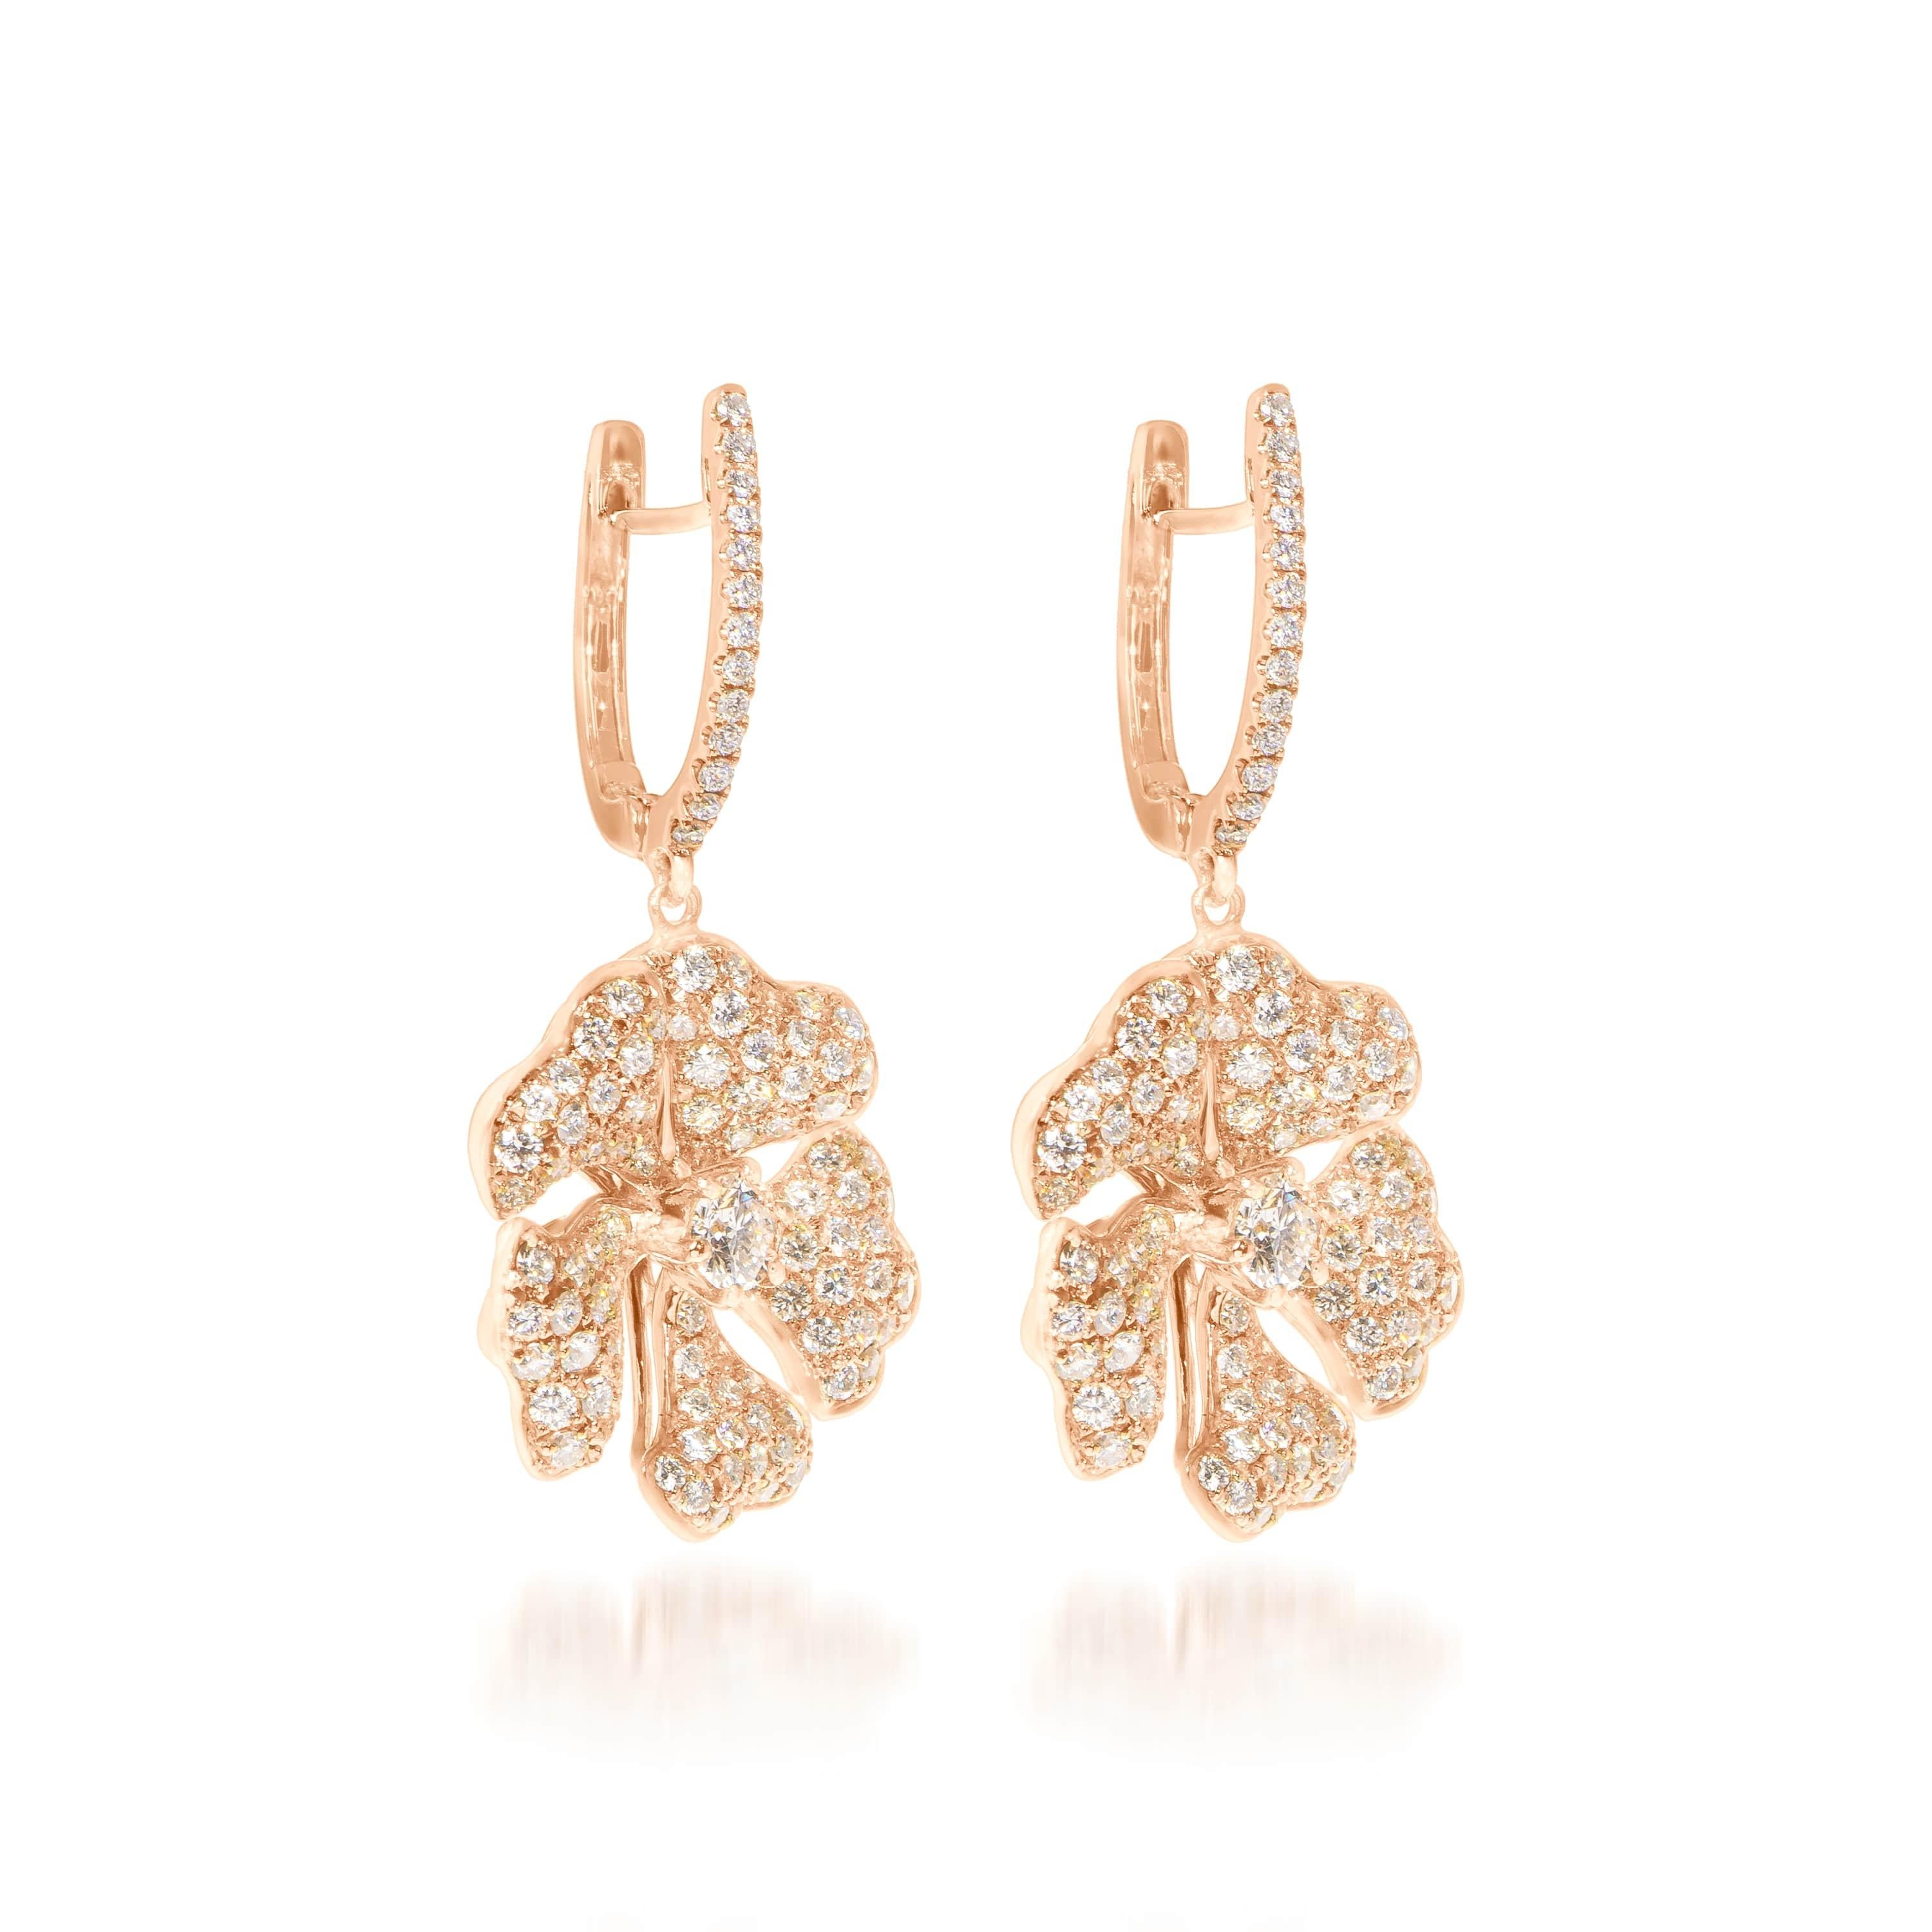 Bloom Gold and Pavé Diamond Drop Flower Earrings in 18K Rose Gold

Inspired by the exquisite petals of the alpine cinquefoil flower, the Bloom collection combines the richness of diamonds and precious metals with the light versatility of this